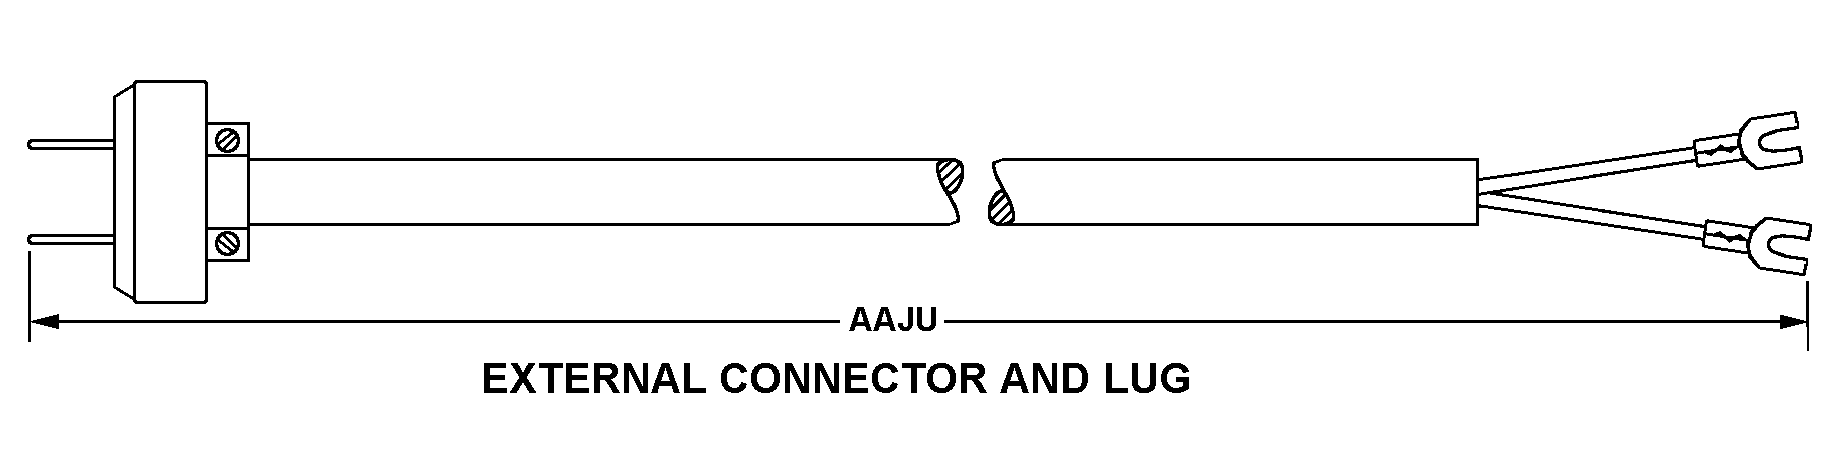 EXTERNAL CONNECTOR AND LUG style nsn 6150-01-412-7789